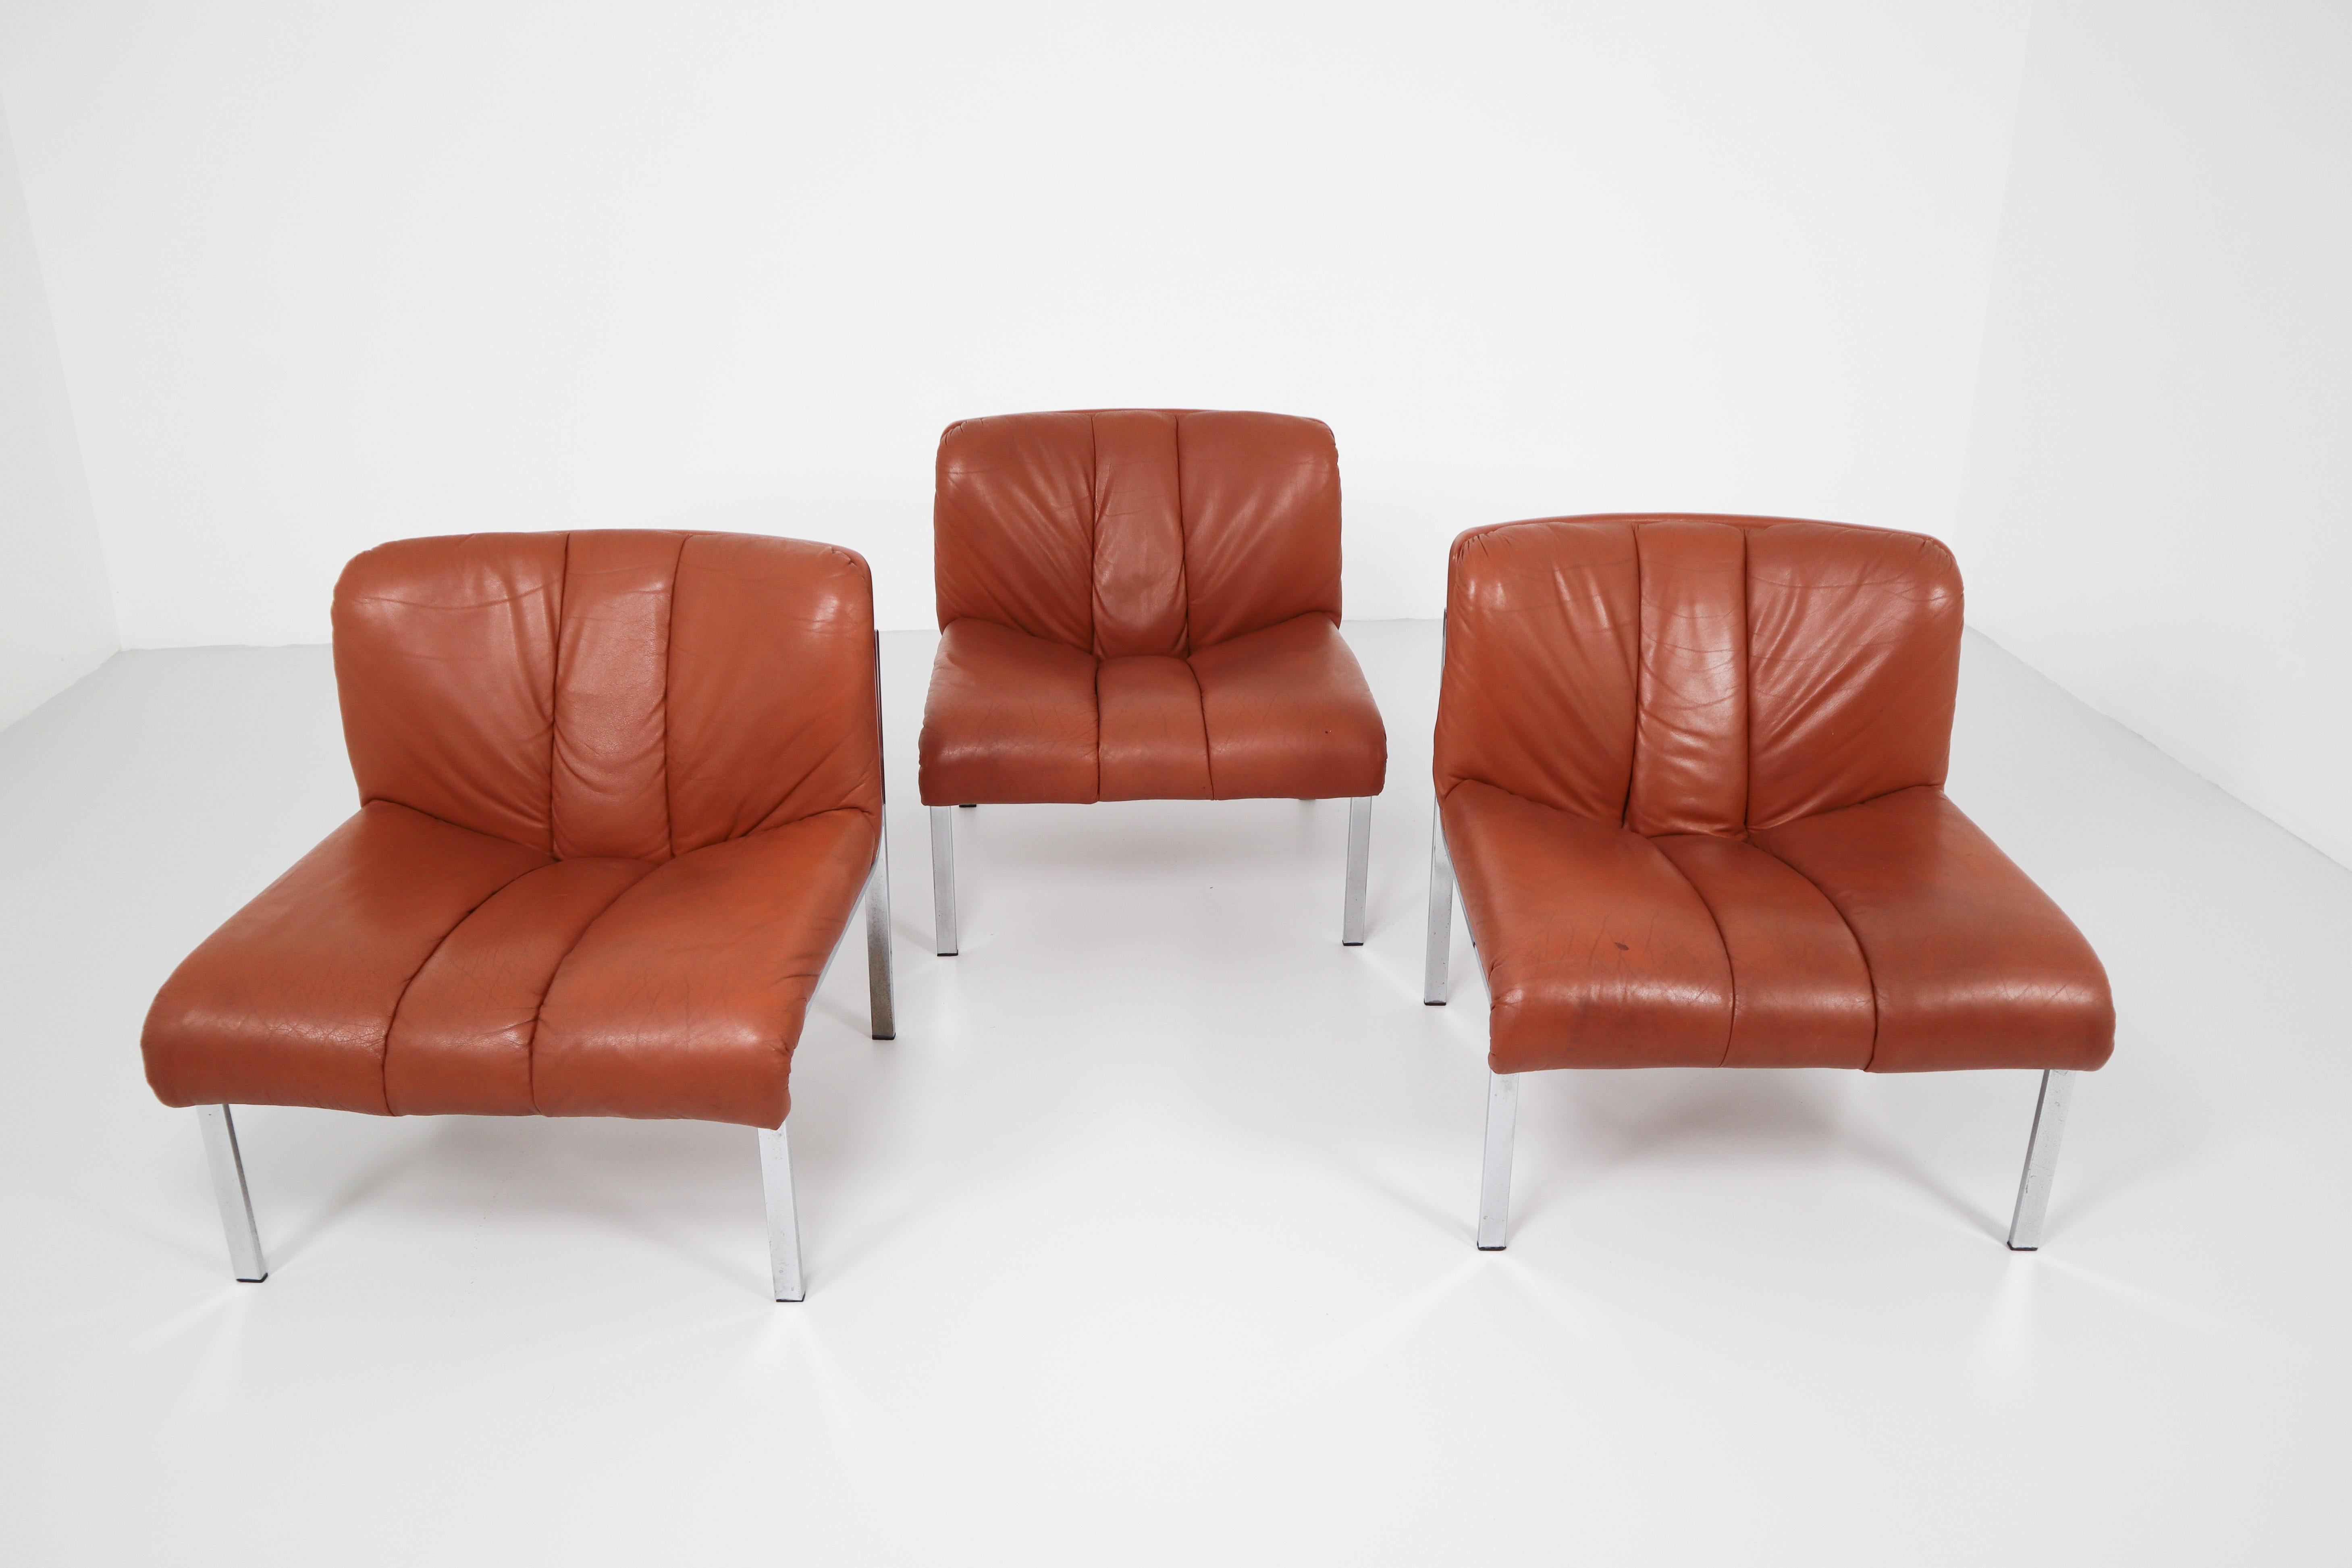 Set of Three Chairs, Sofa in Cognac Leather by Girsberger, Switzerland, 1970s 2